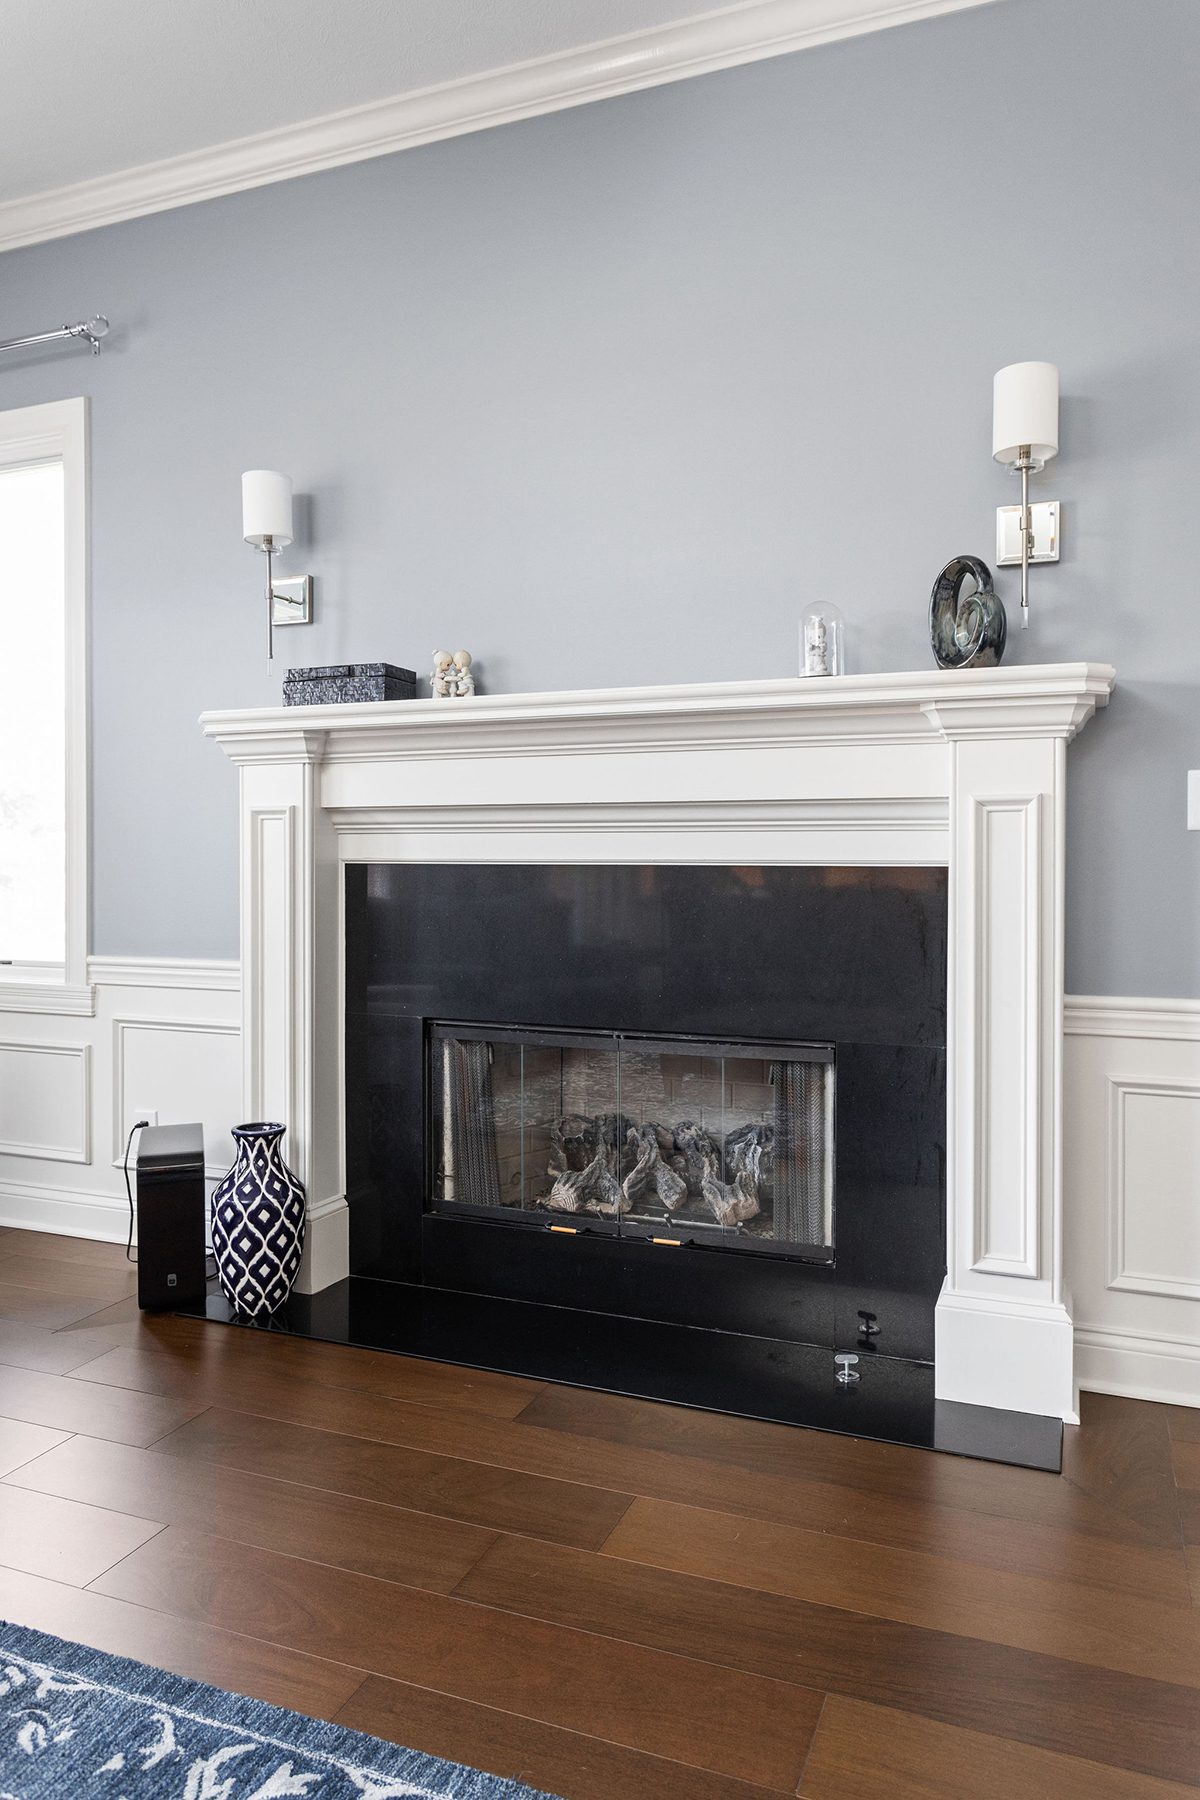 if you have an idea for a fireplace renovation, you can adjust anything from the surrounding stone to the mantel and painting of the wall